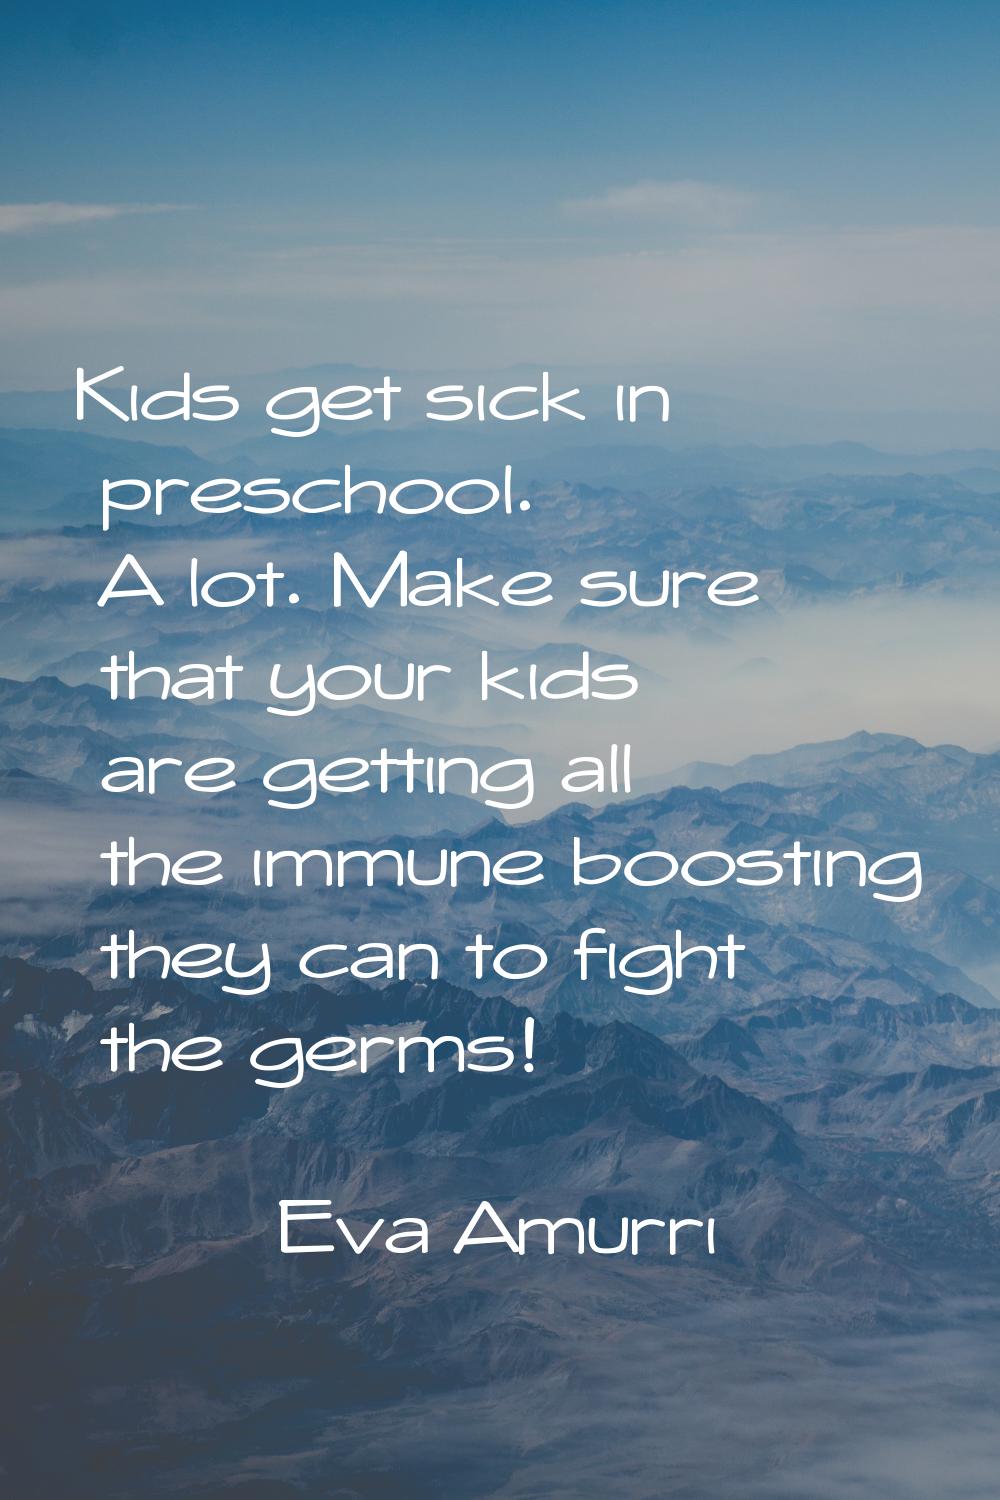 Kids get sick in preschool. A lot. Make sure that your kids are getting all the immune boosting the